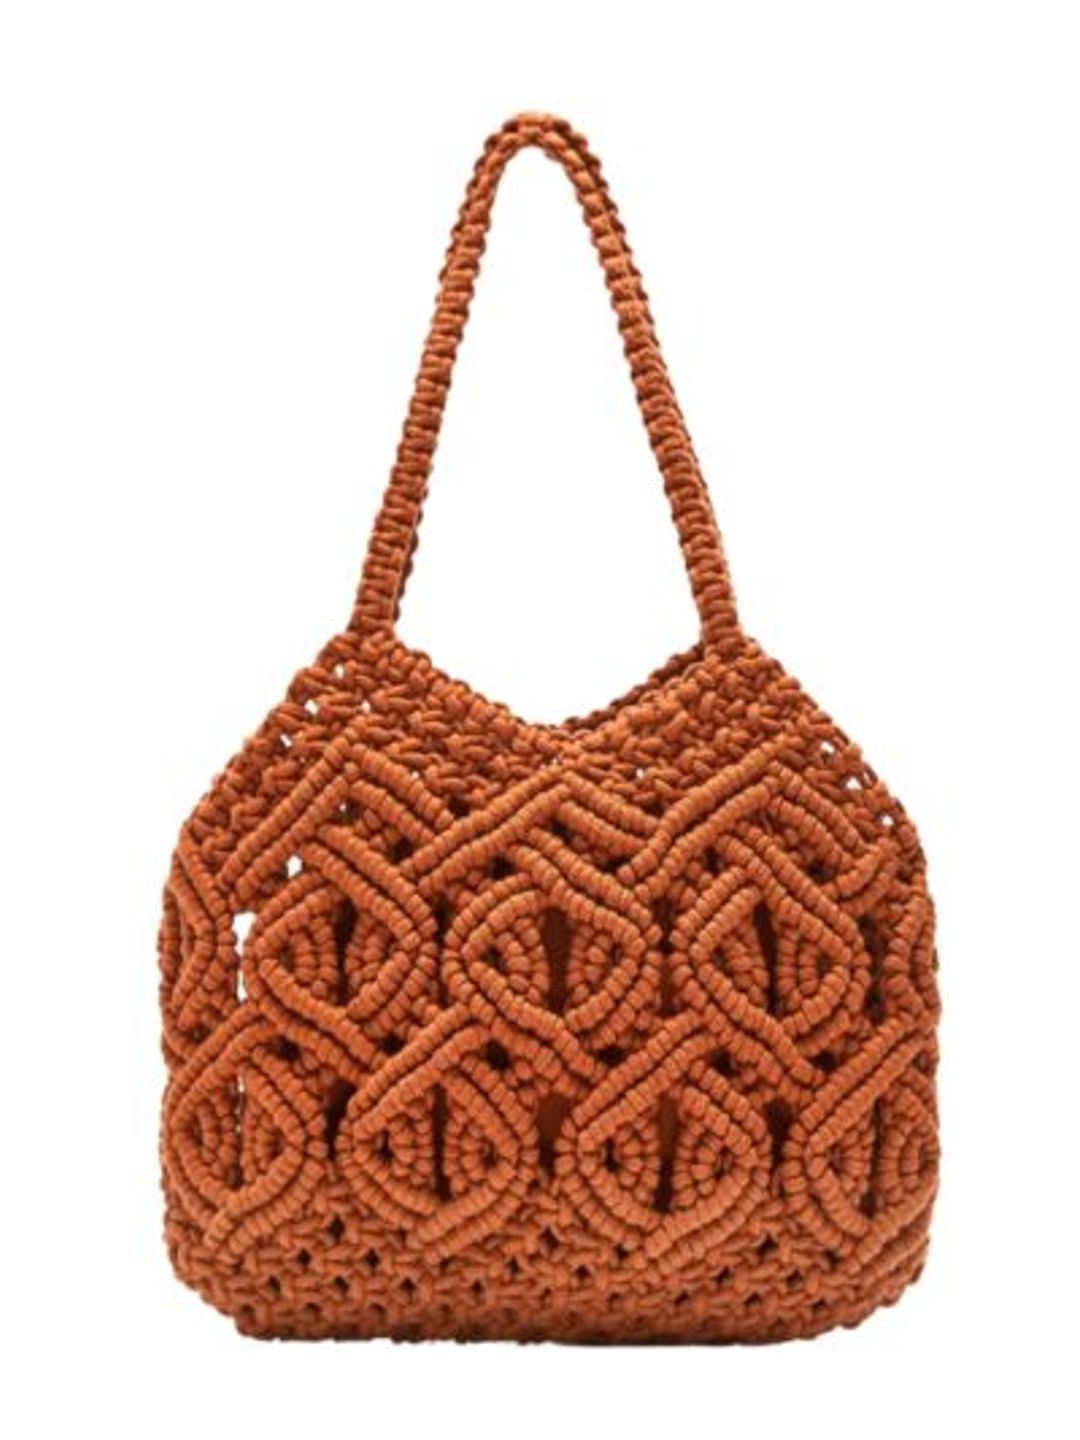 Crochet Duffle Bag by Regina: Make a simple navy-chic style backpack